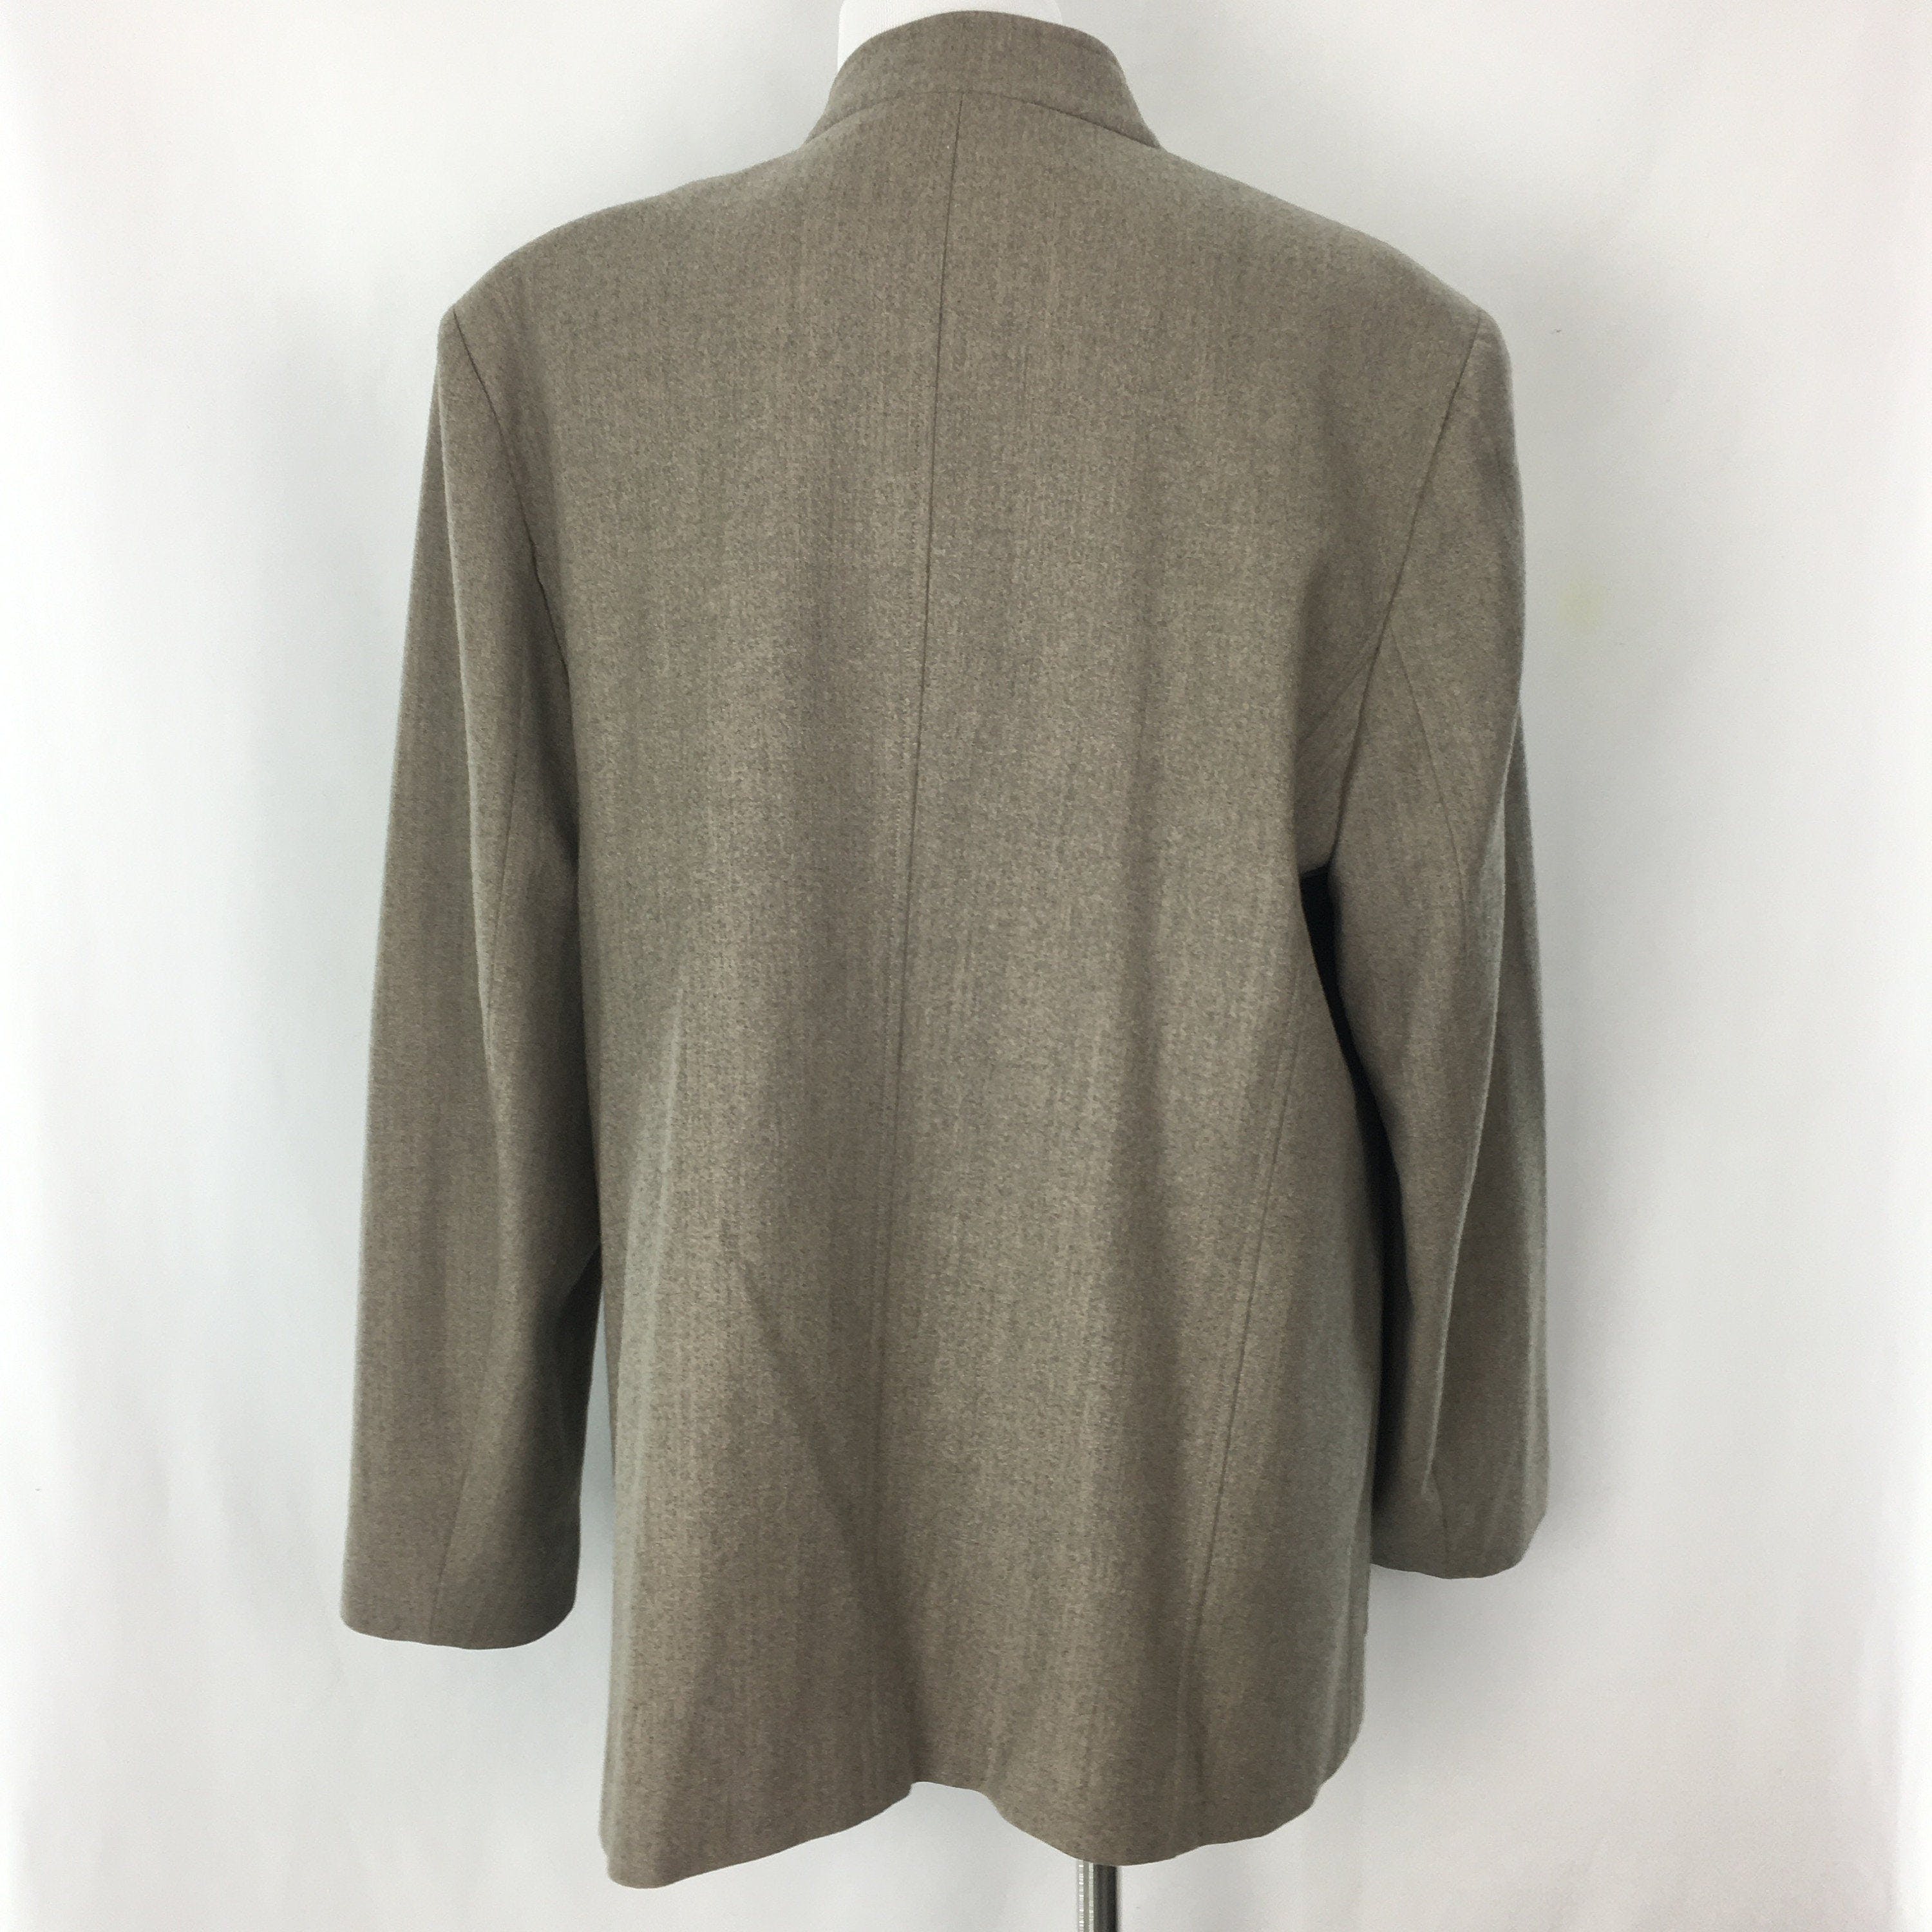 Vintage Brown Wool Asymmetrical Button Up Jacket by Talbots | Shop ...